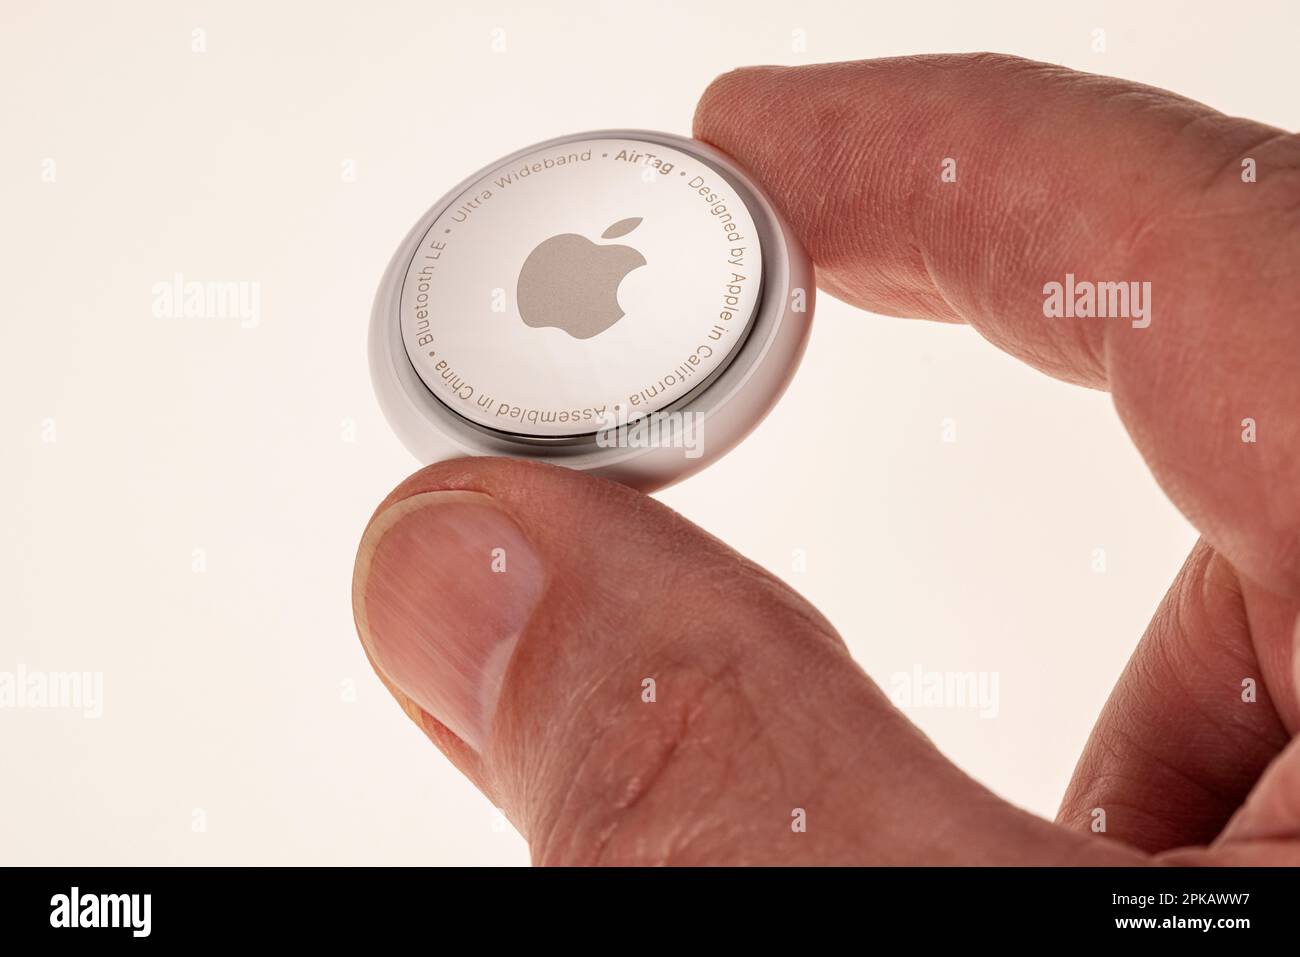 Man hand holding Apple AirTag, icon image, tracking tag, key finder, white background, Stock Photo